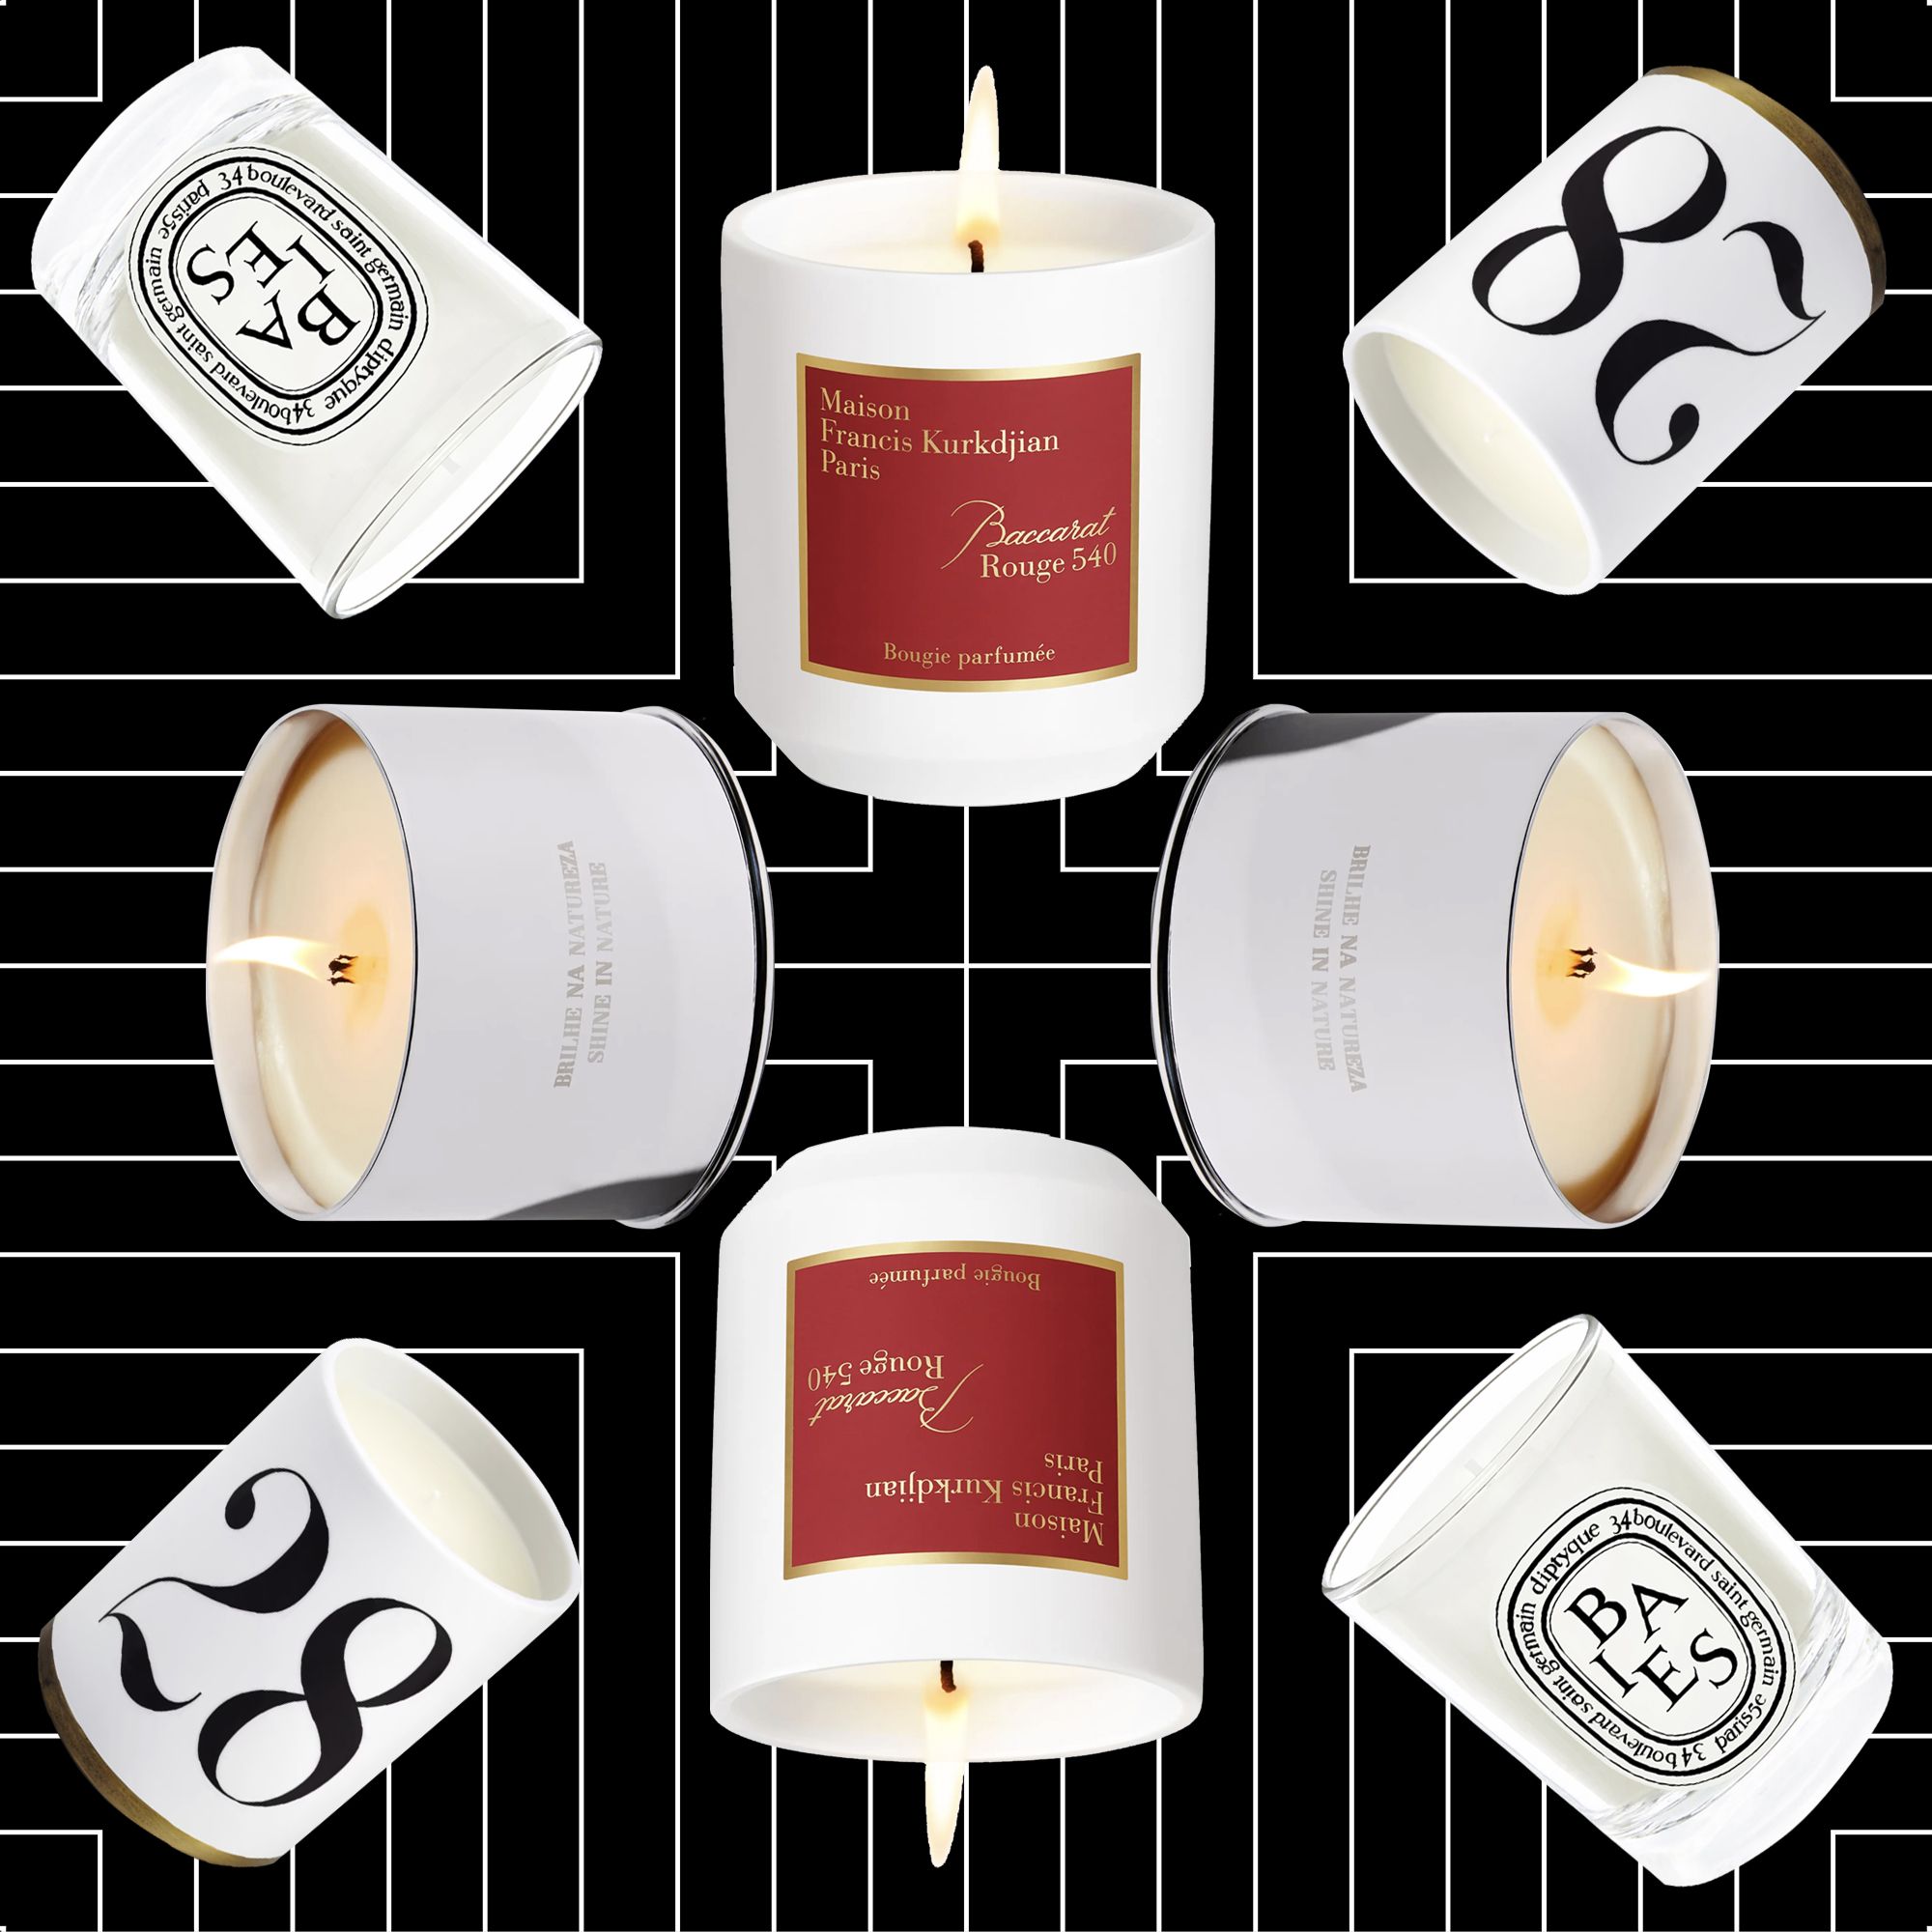 6 Most Romantic Candle Scents for Valentine's Day